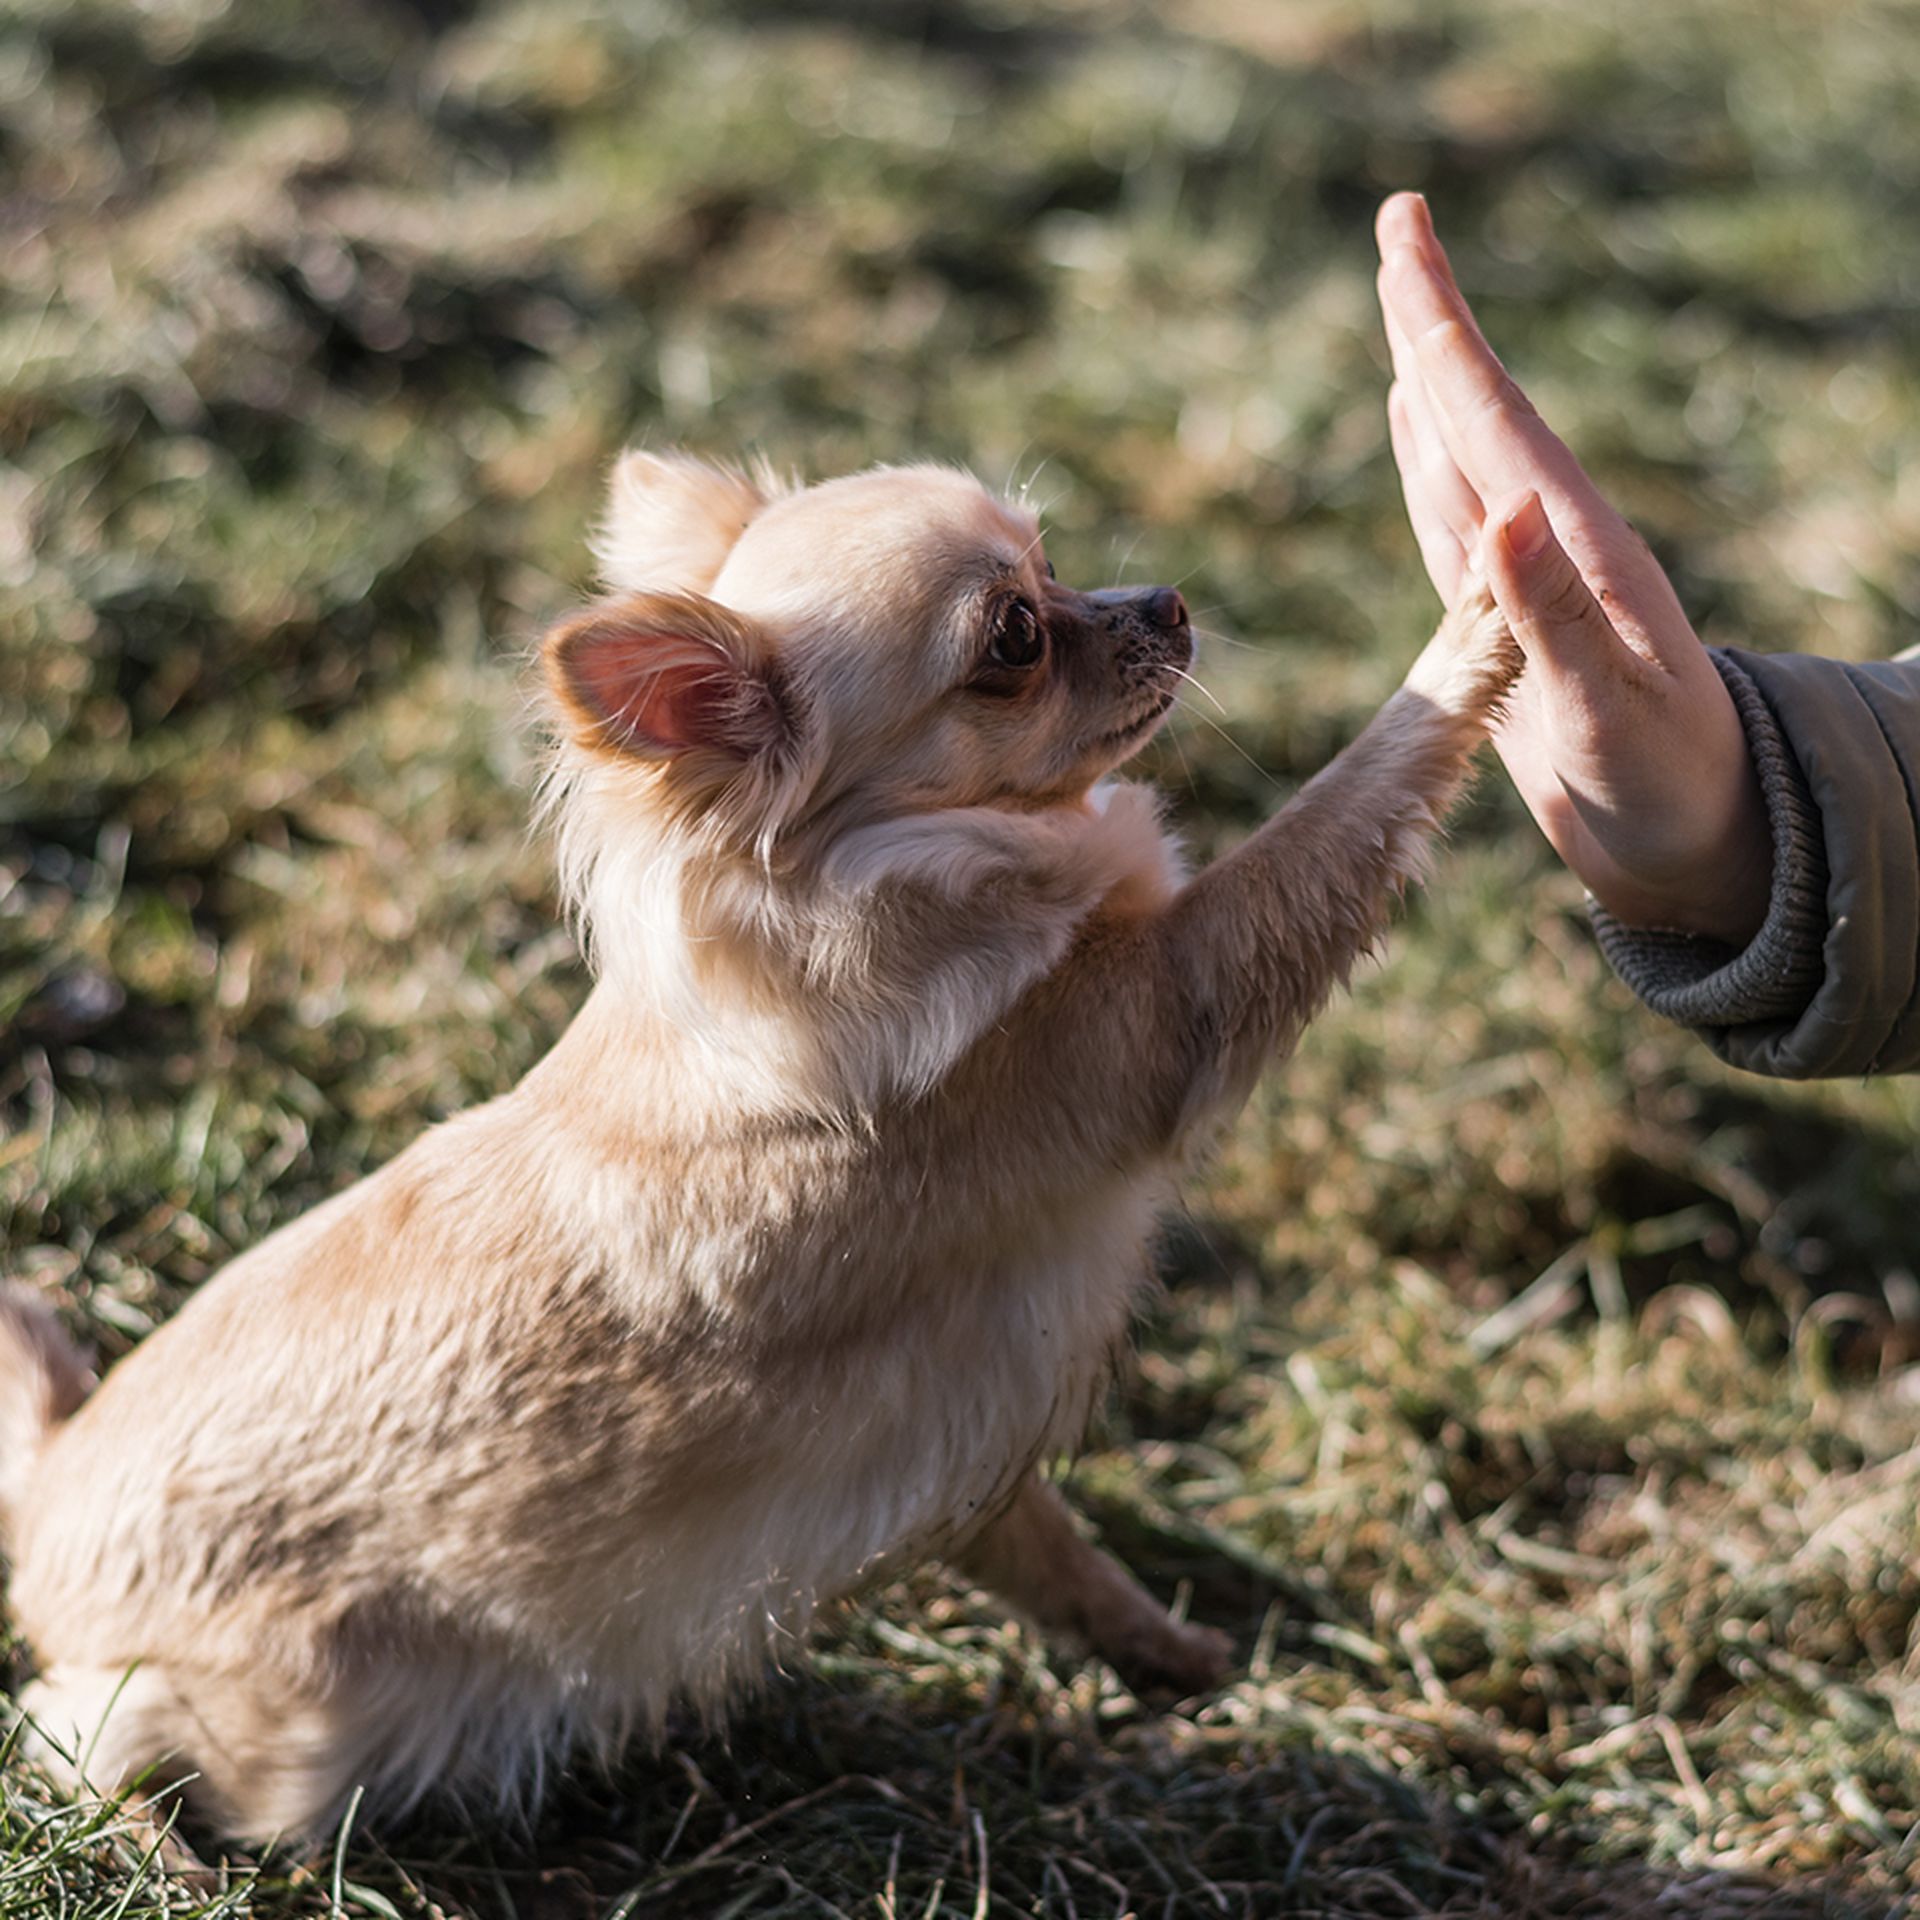 A chihuahua sitting on grass and giving a high-five to a person.